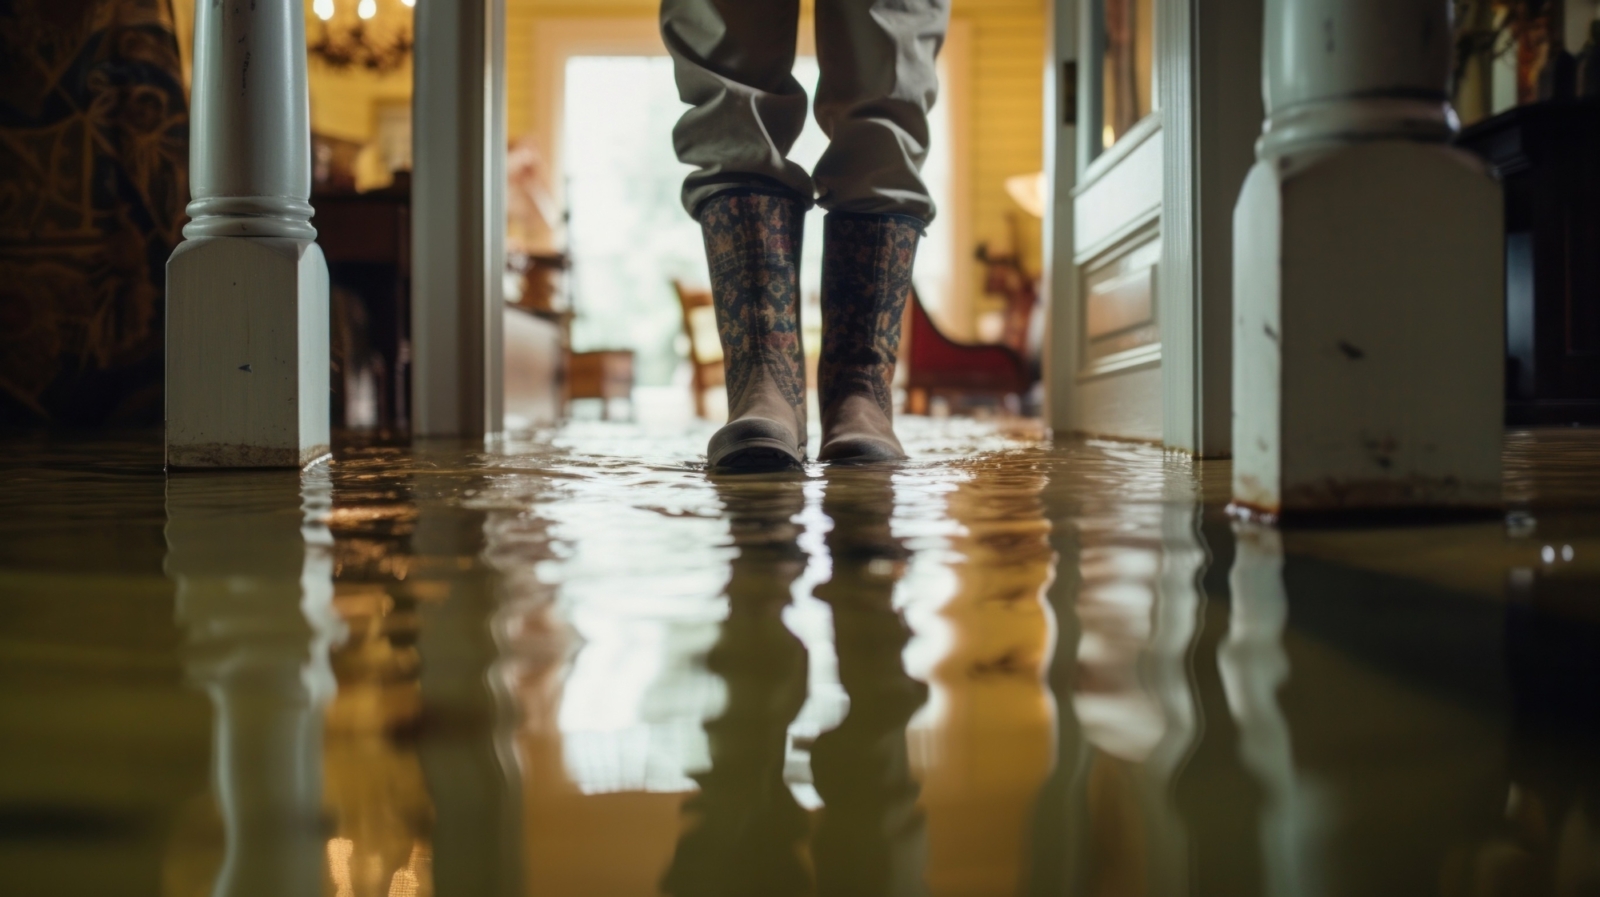 What are the main concerns of water damage?